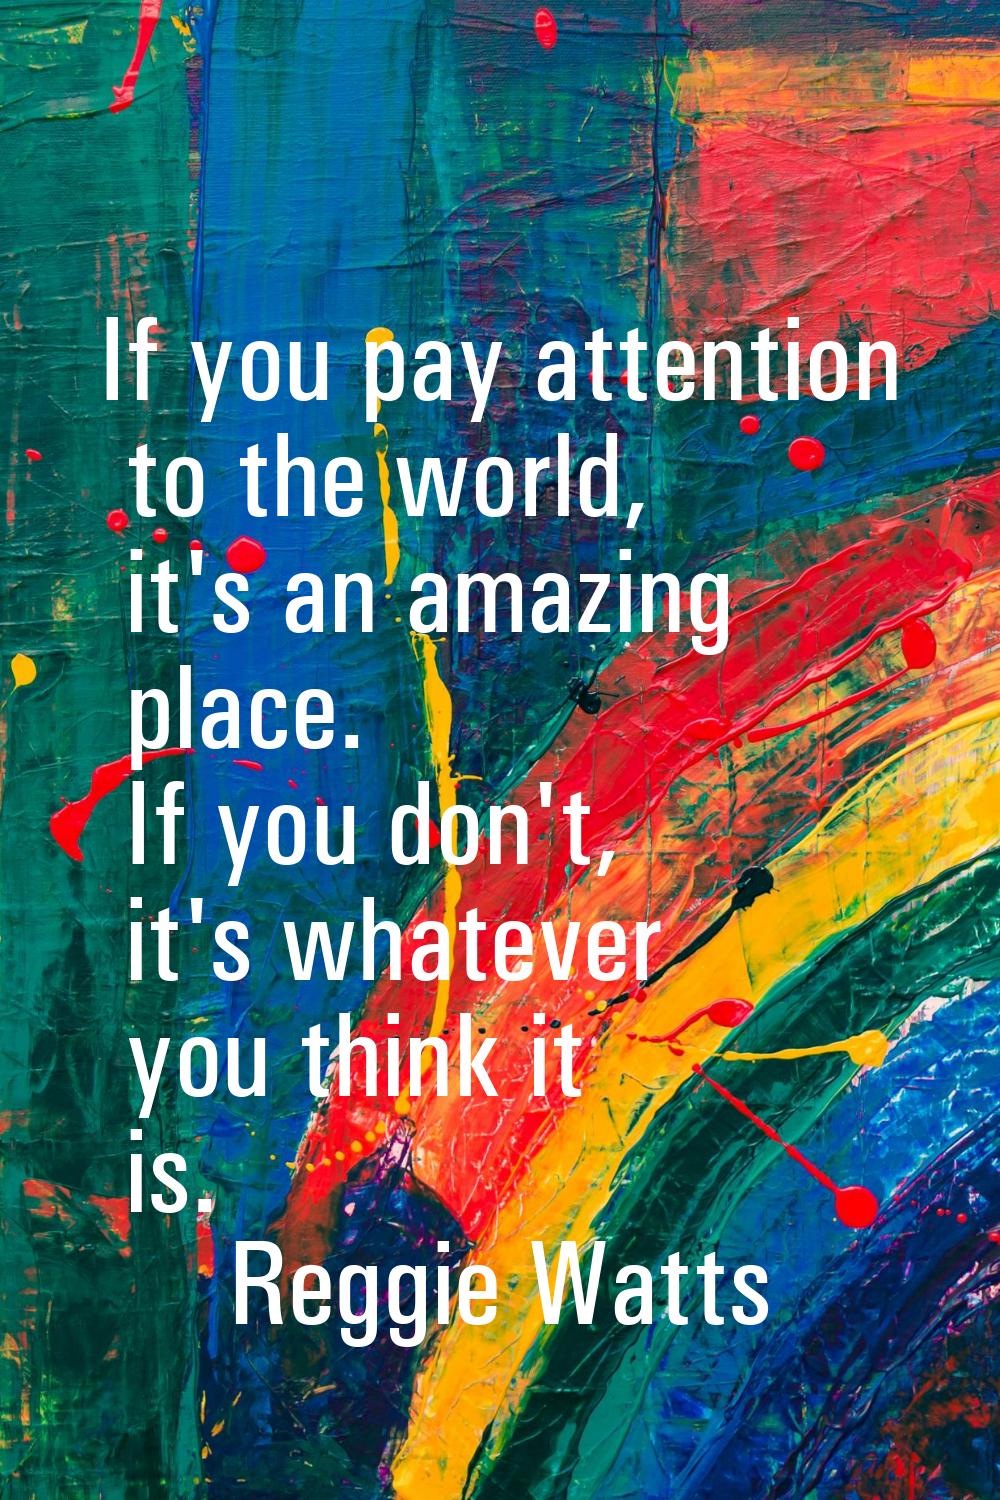 If you pay attention to the world, it's an amazing place. If you don't, it's whatever you think it 